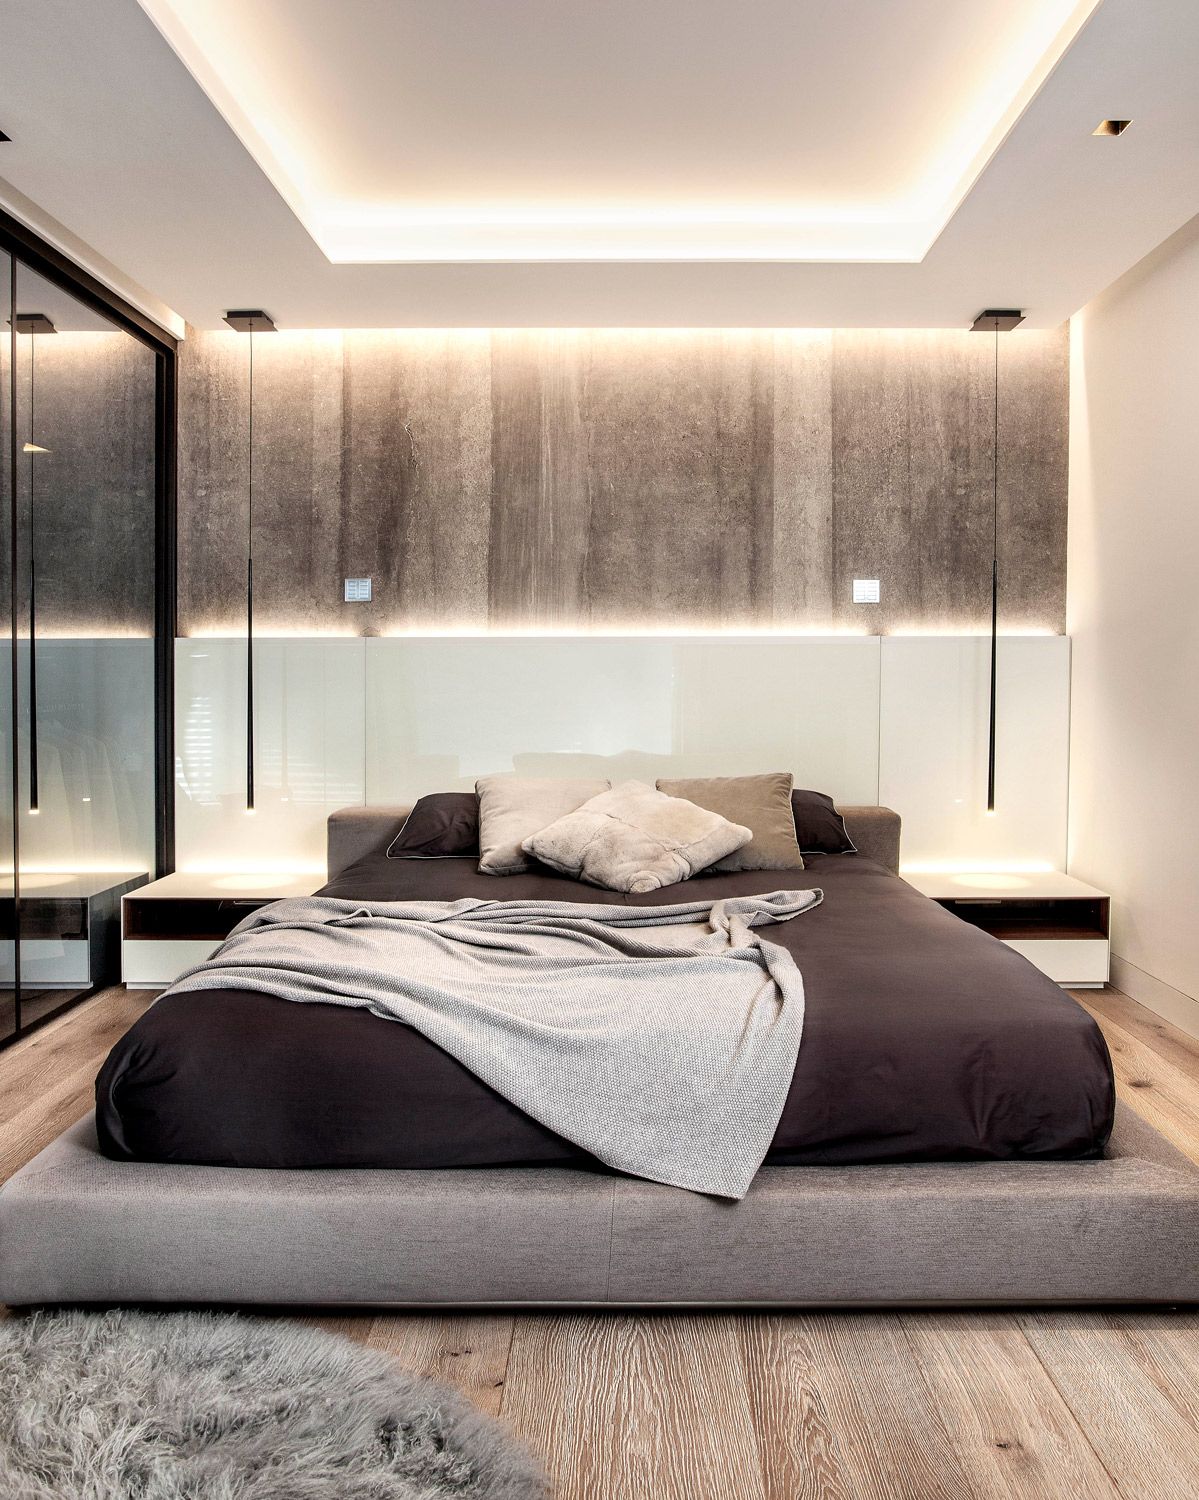 28 sophisticated bedrooms with low platform beds - low